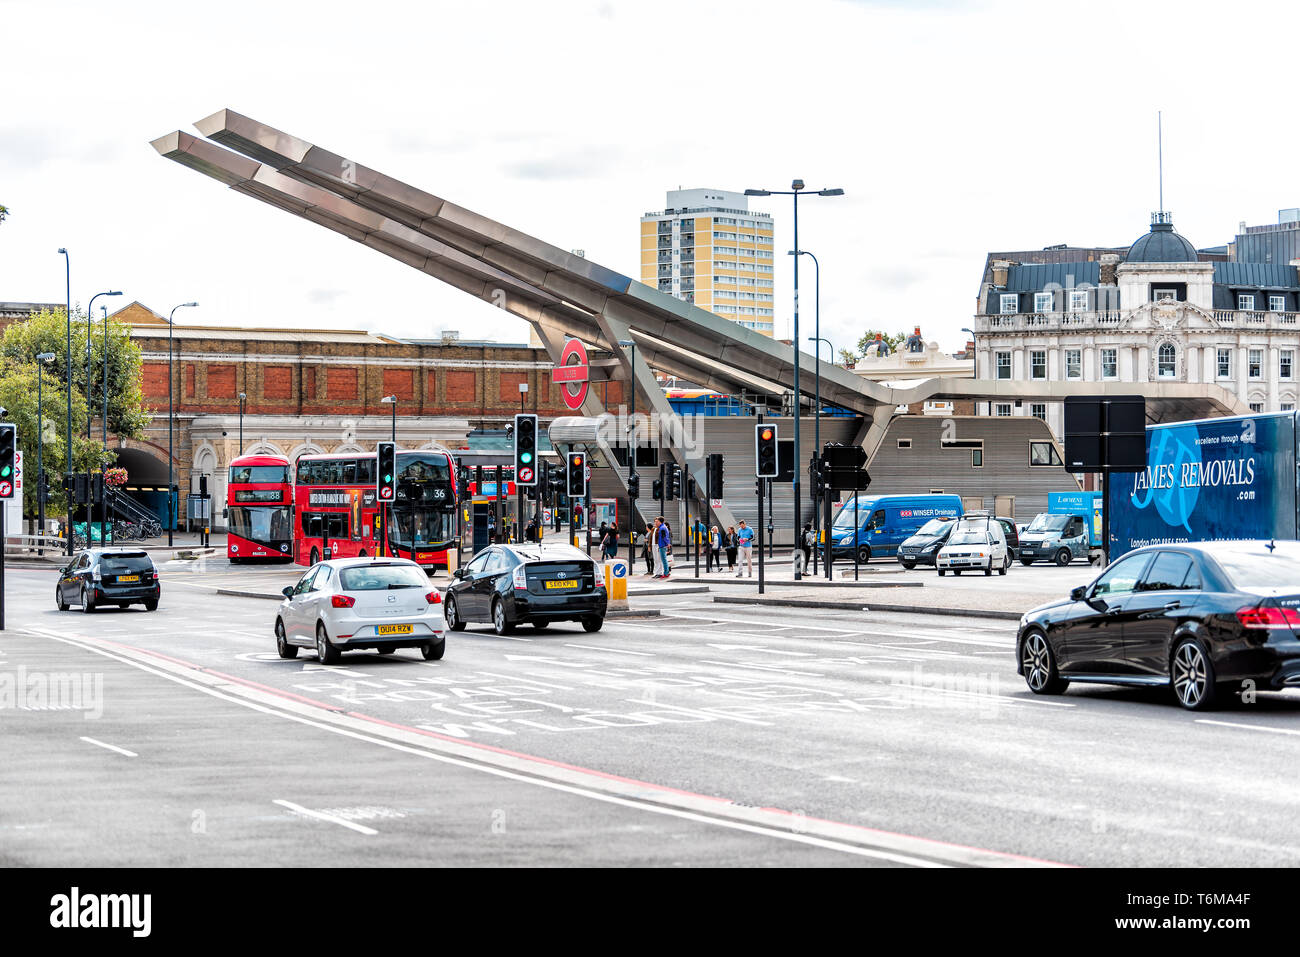 London, UK - September 14, 2018: Vauxhall neighborhood with modern architecture of station and bus stop with traffic and cars on street road Stock Photo